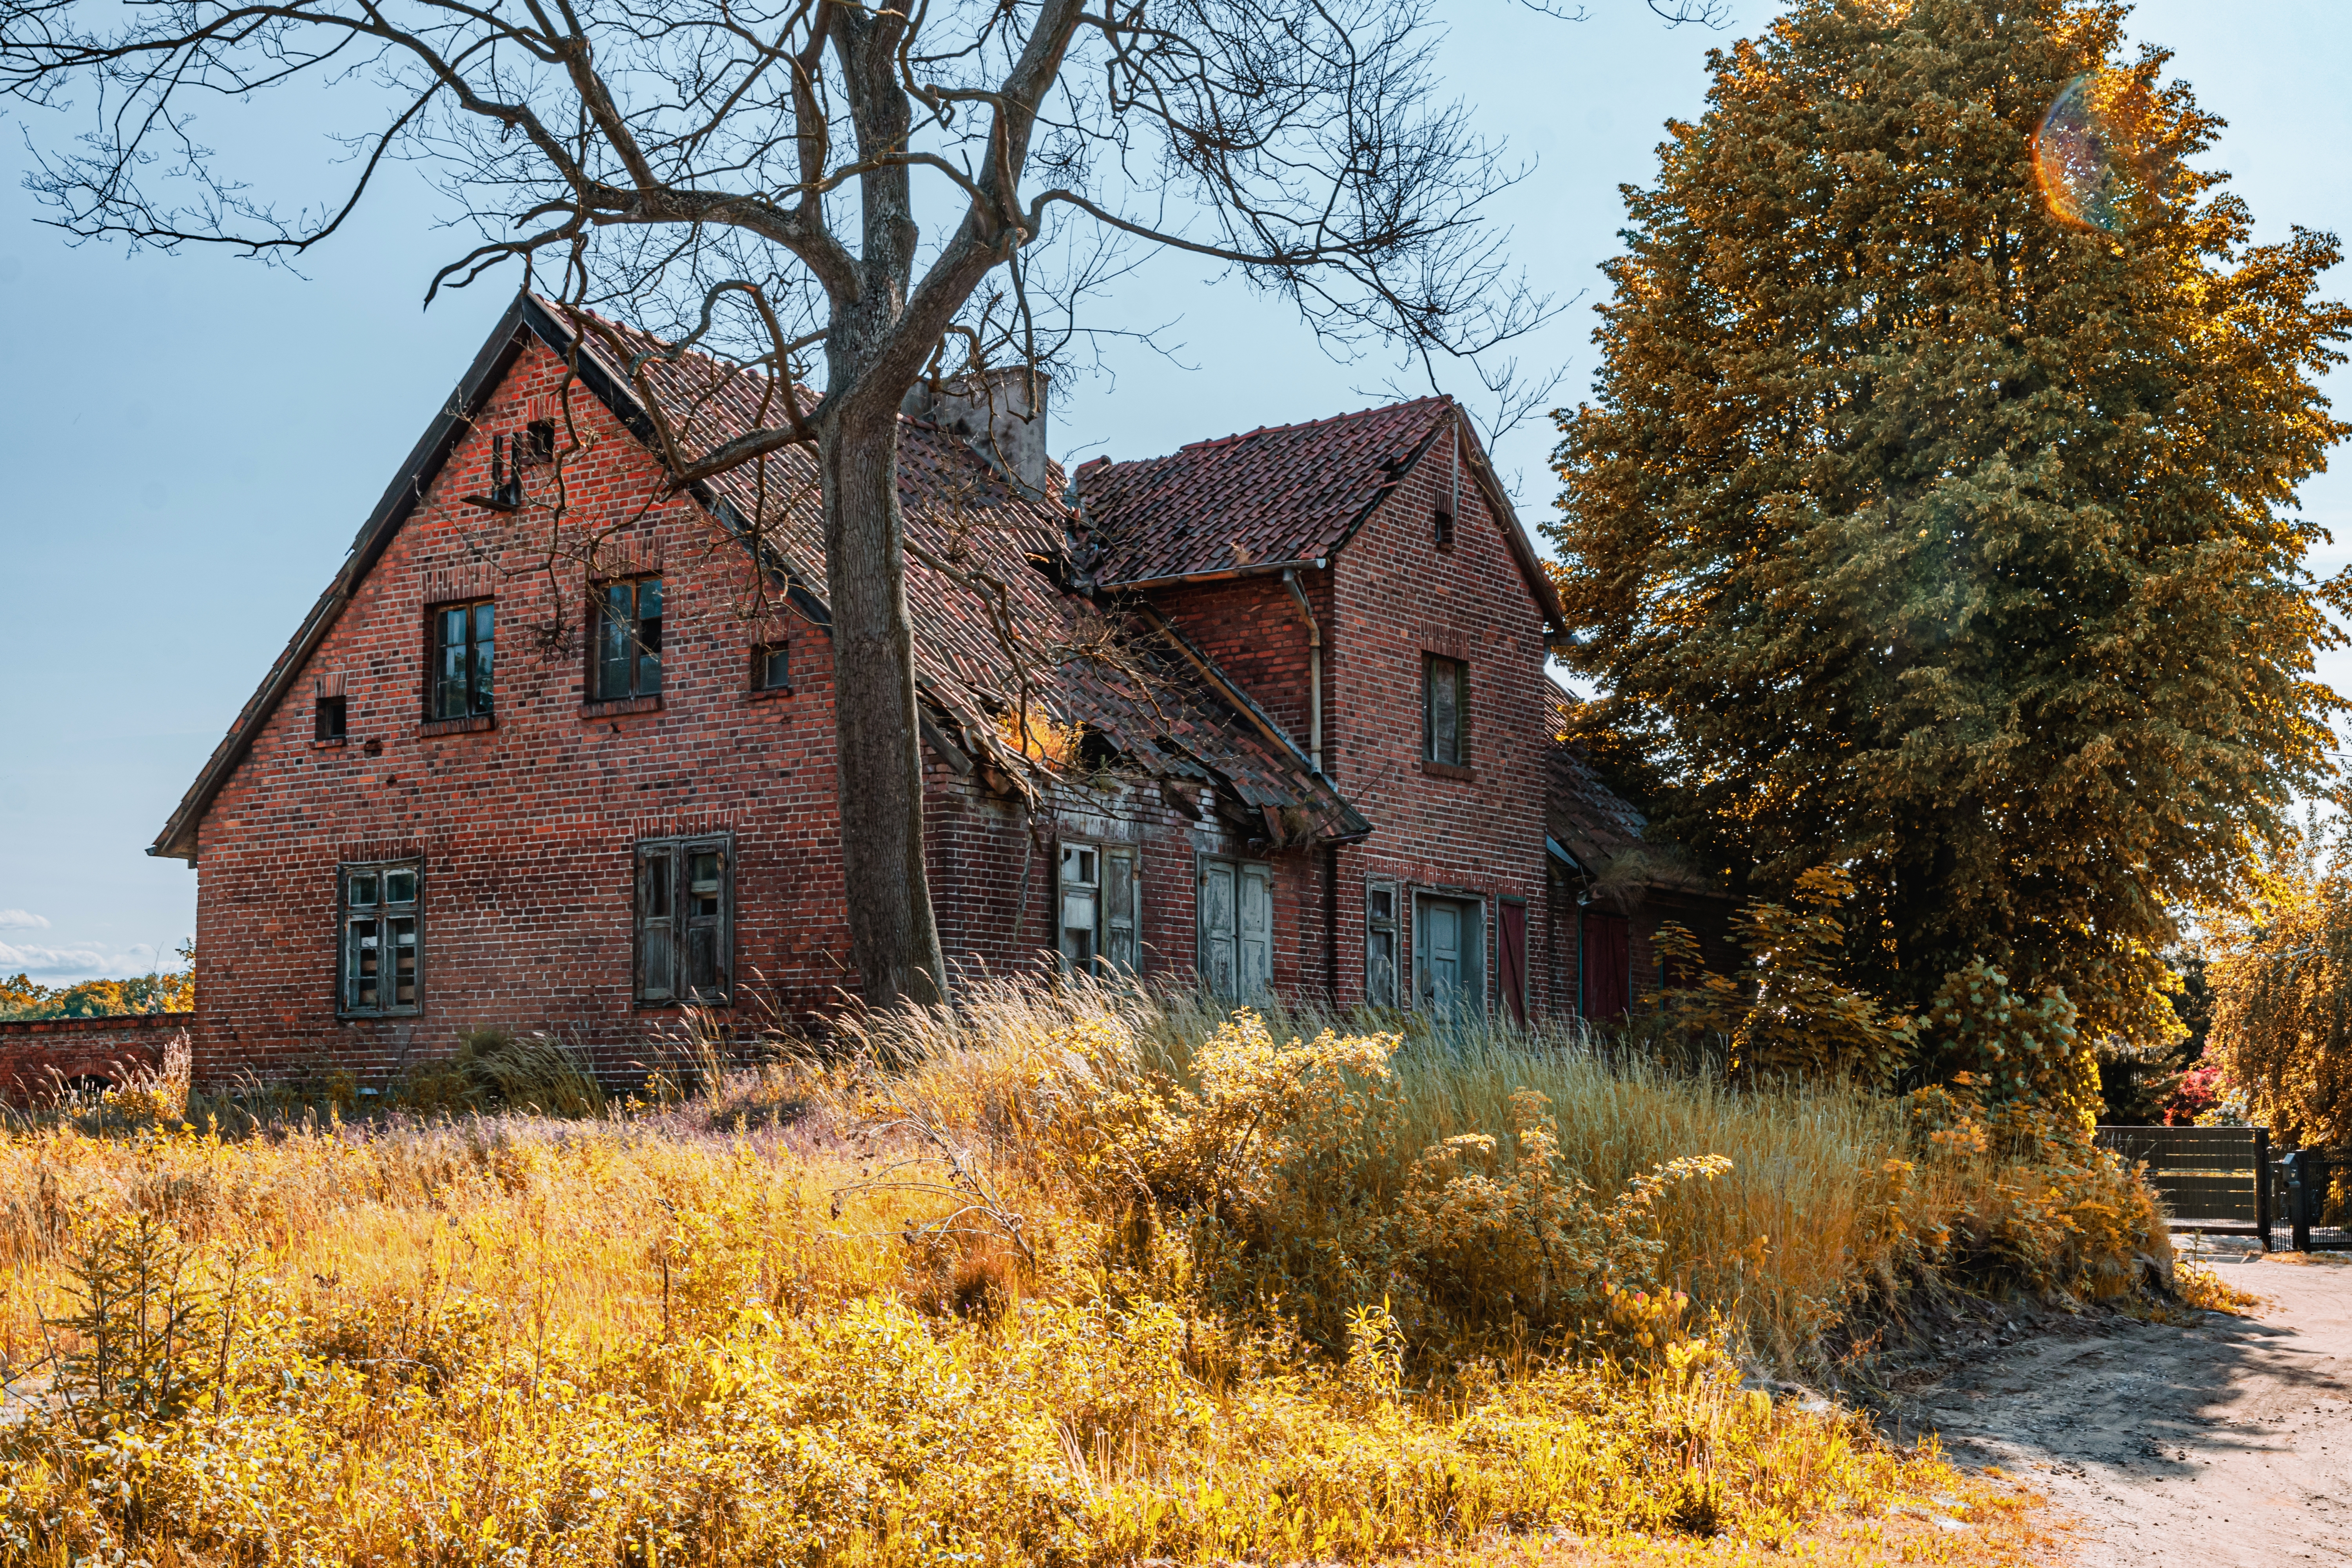 Old spooky abandoned house | Source: Shutterstock